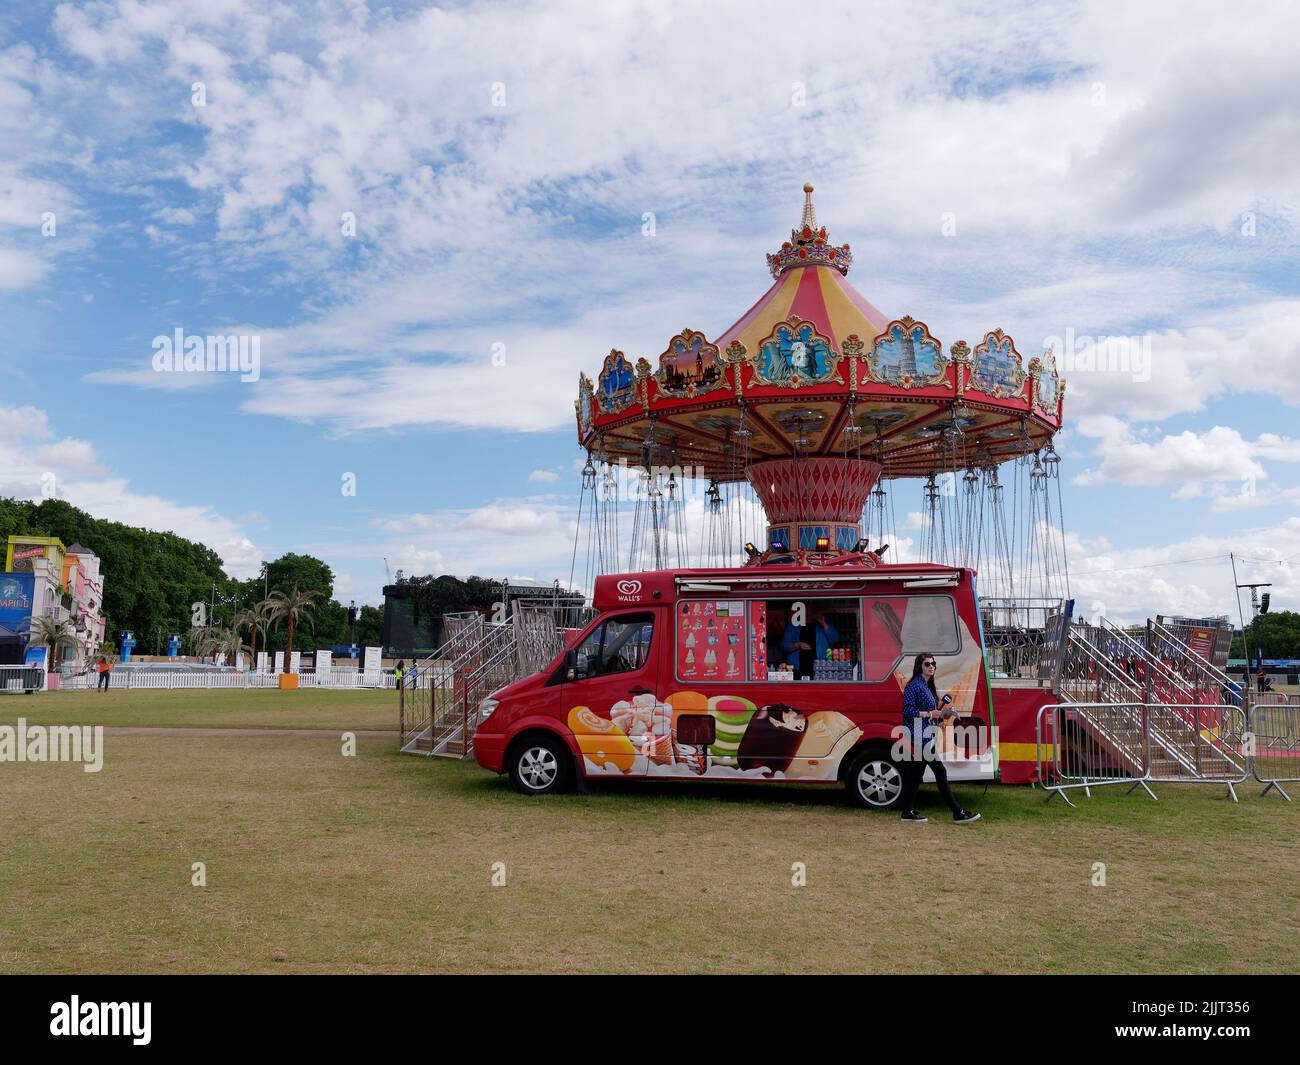 London, Greater London, England, June 30 2022: Ice Cream van and Fairground swing ride aka chair swing ride inside BST Byde Park concert arena Stock Photo